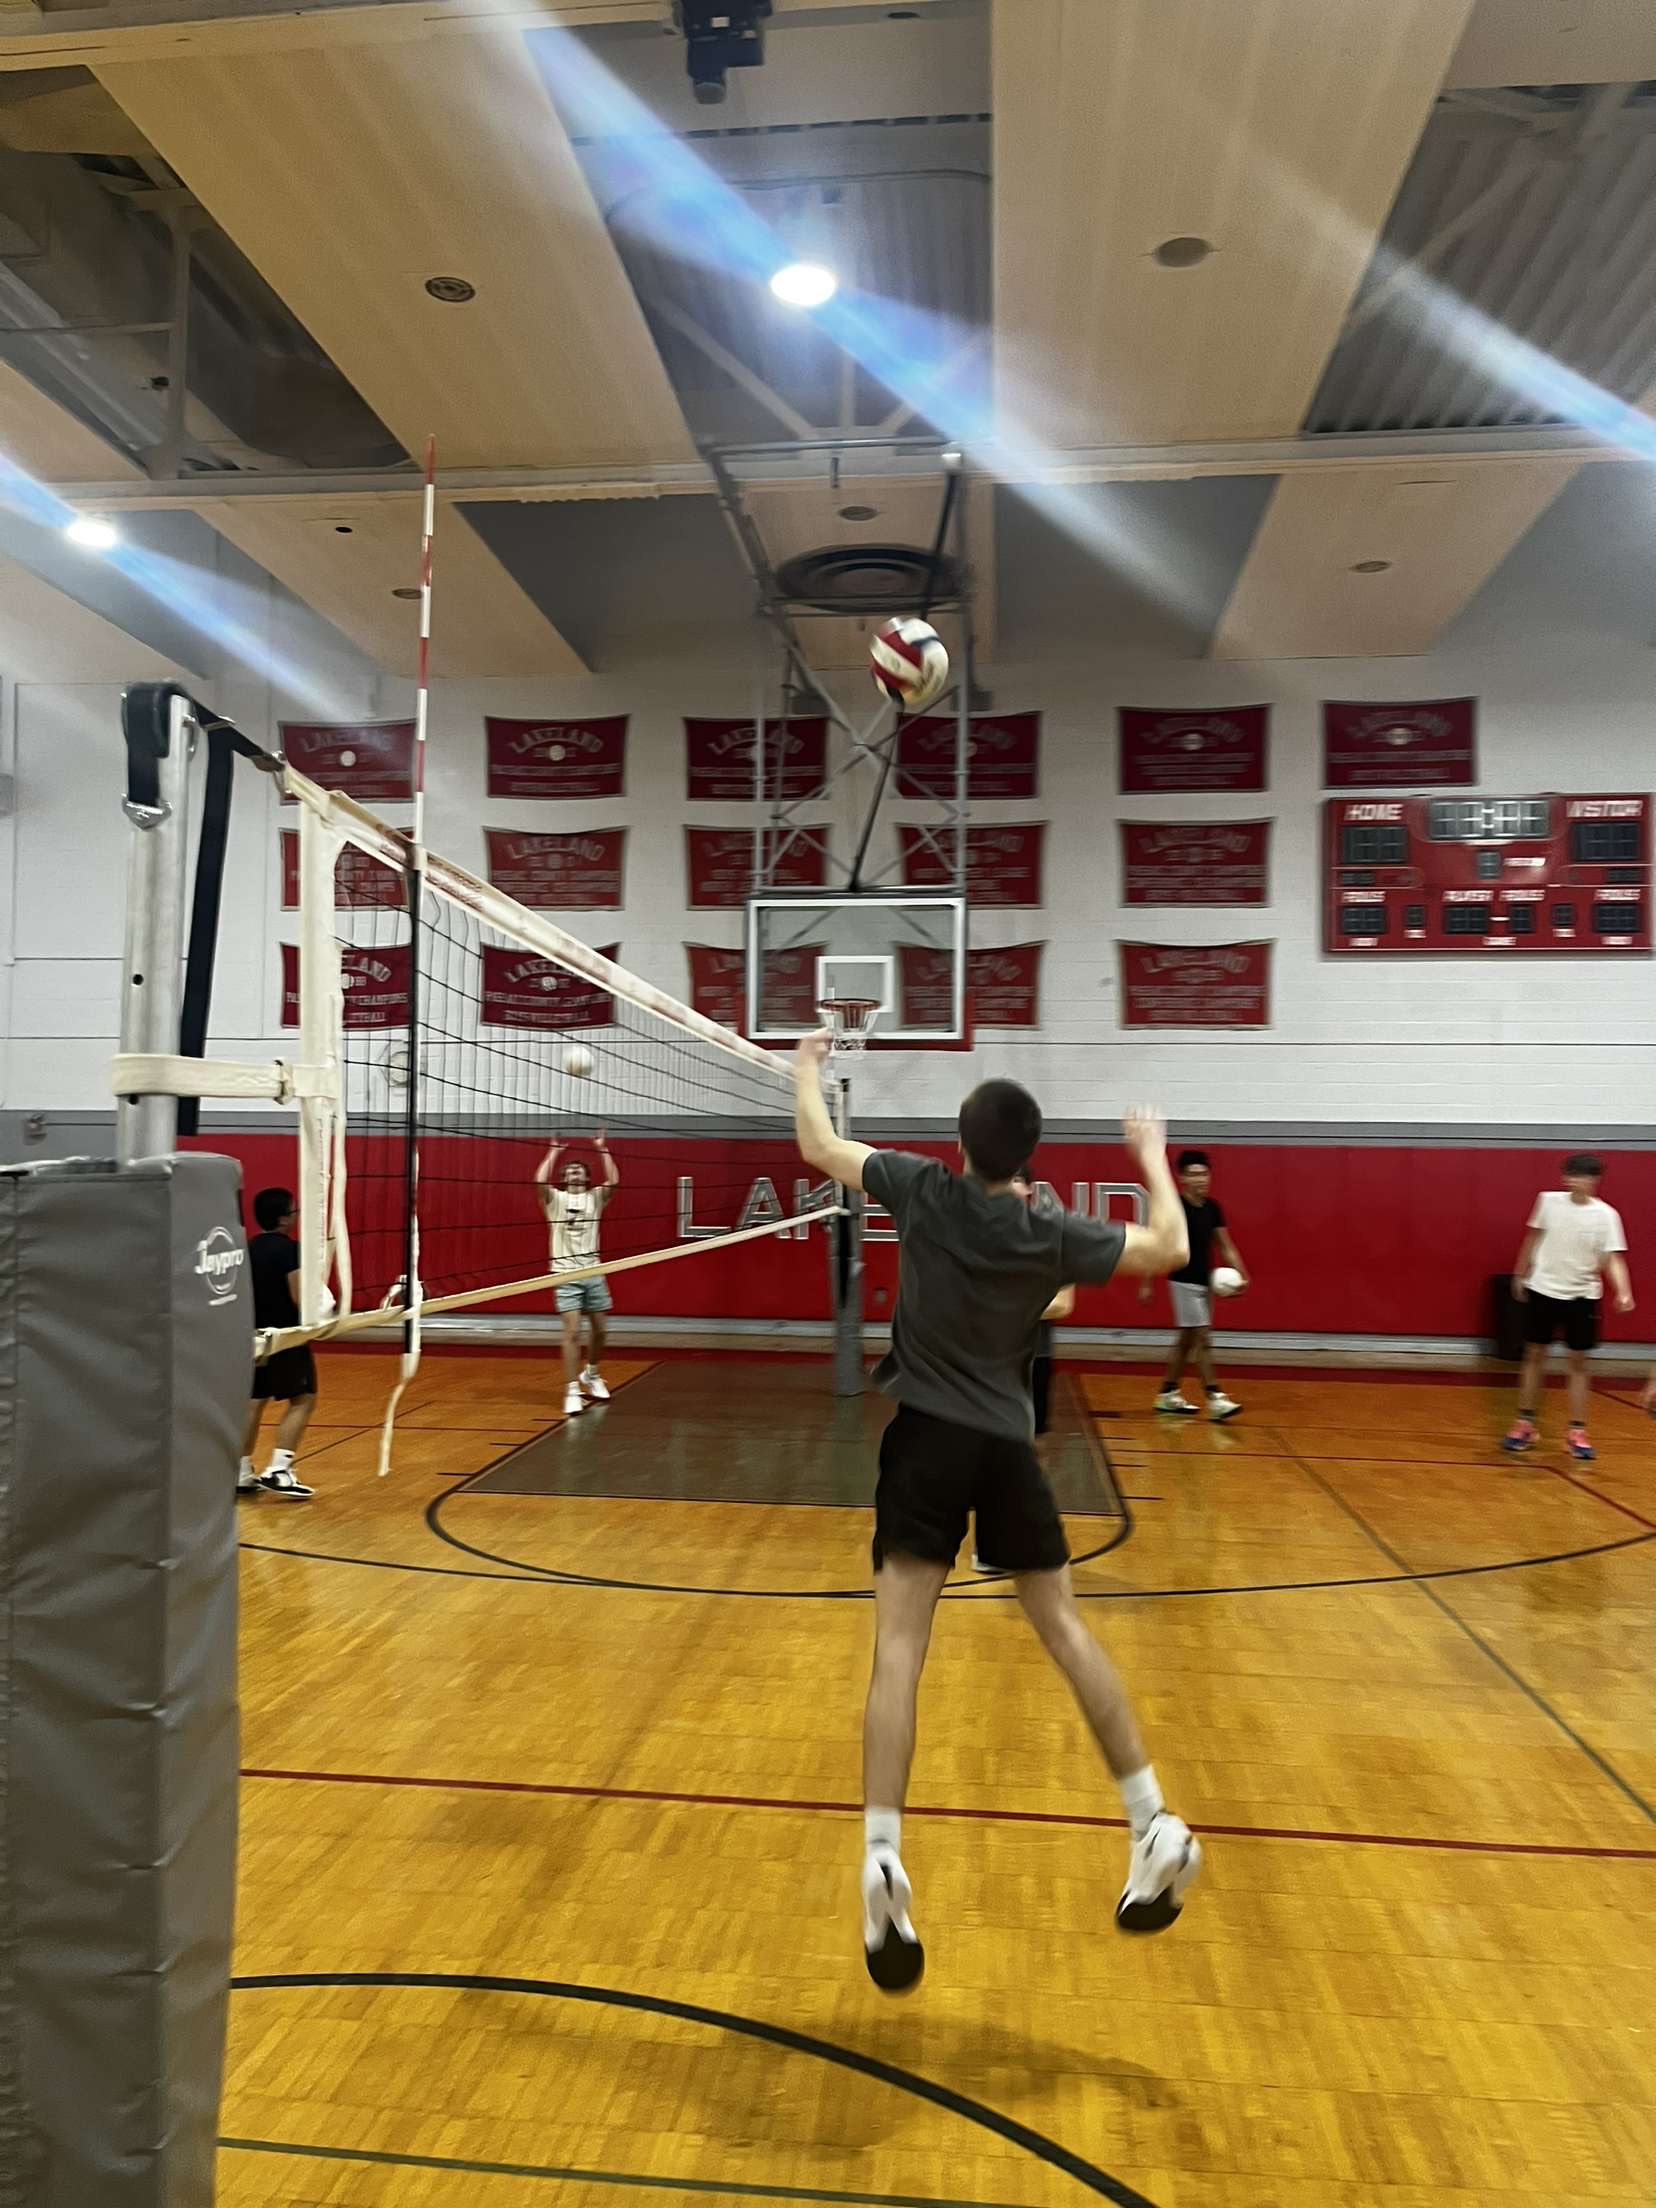 The boys spend their practice time wisely by focusing on their passing & spiking drills.